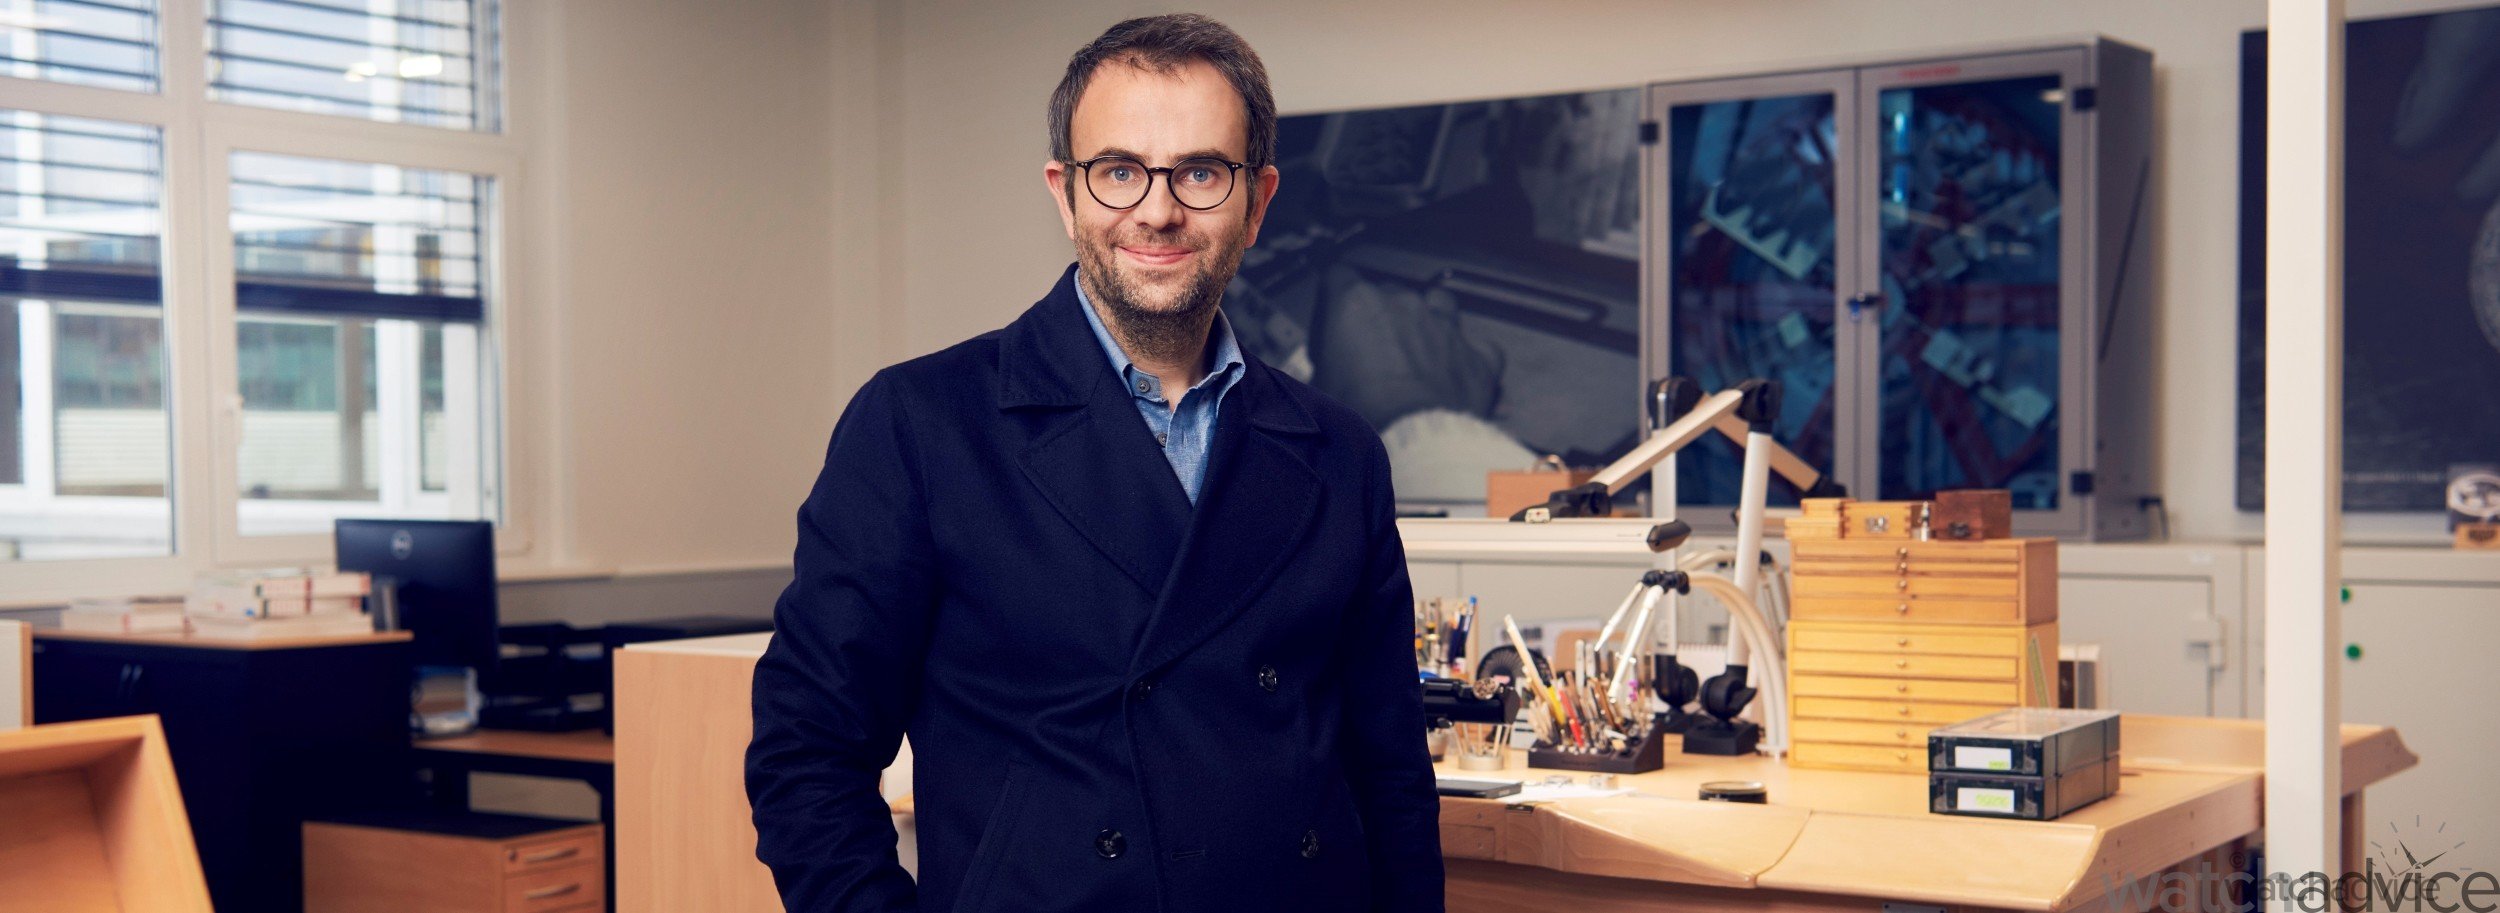 Interview - Nicholas Biebuyck On TAG Heuer Novelties for the LVMH